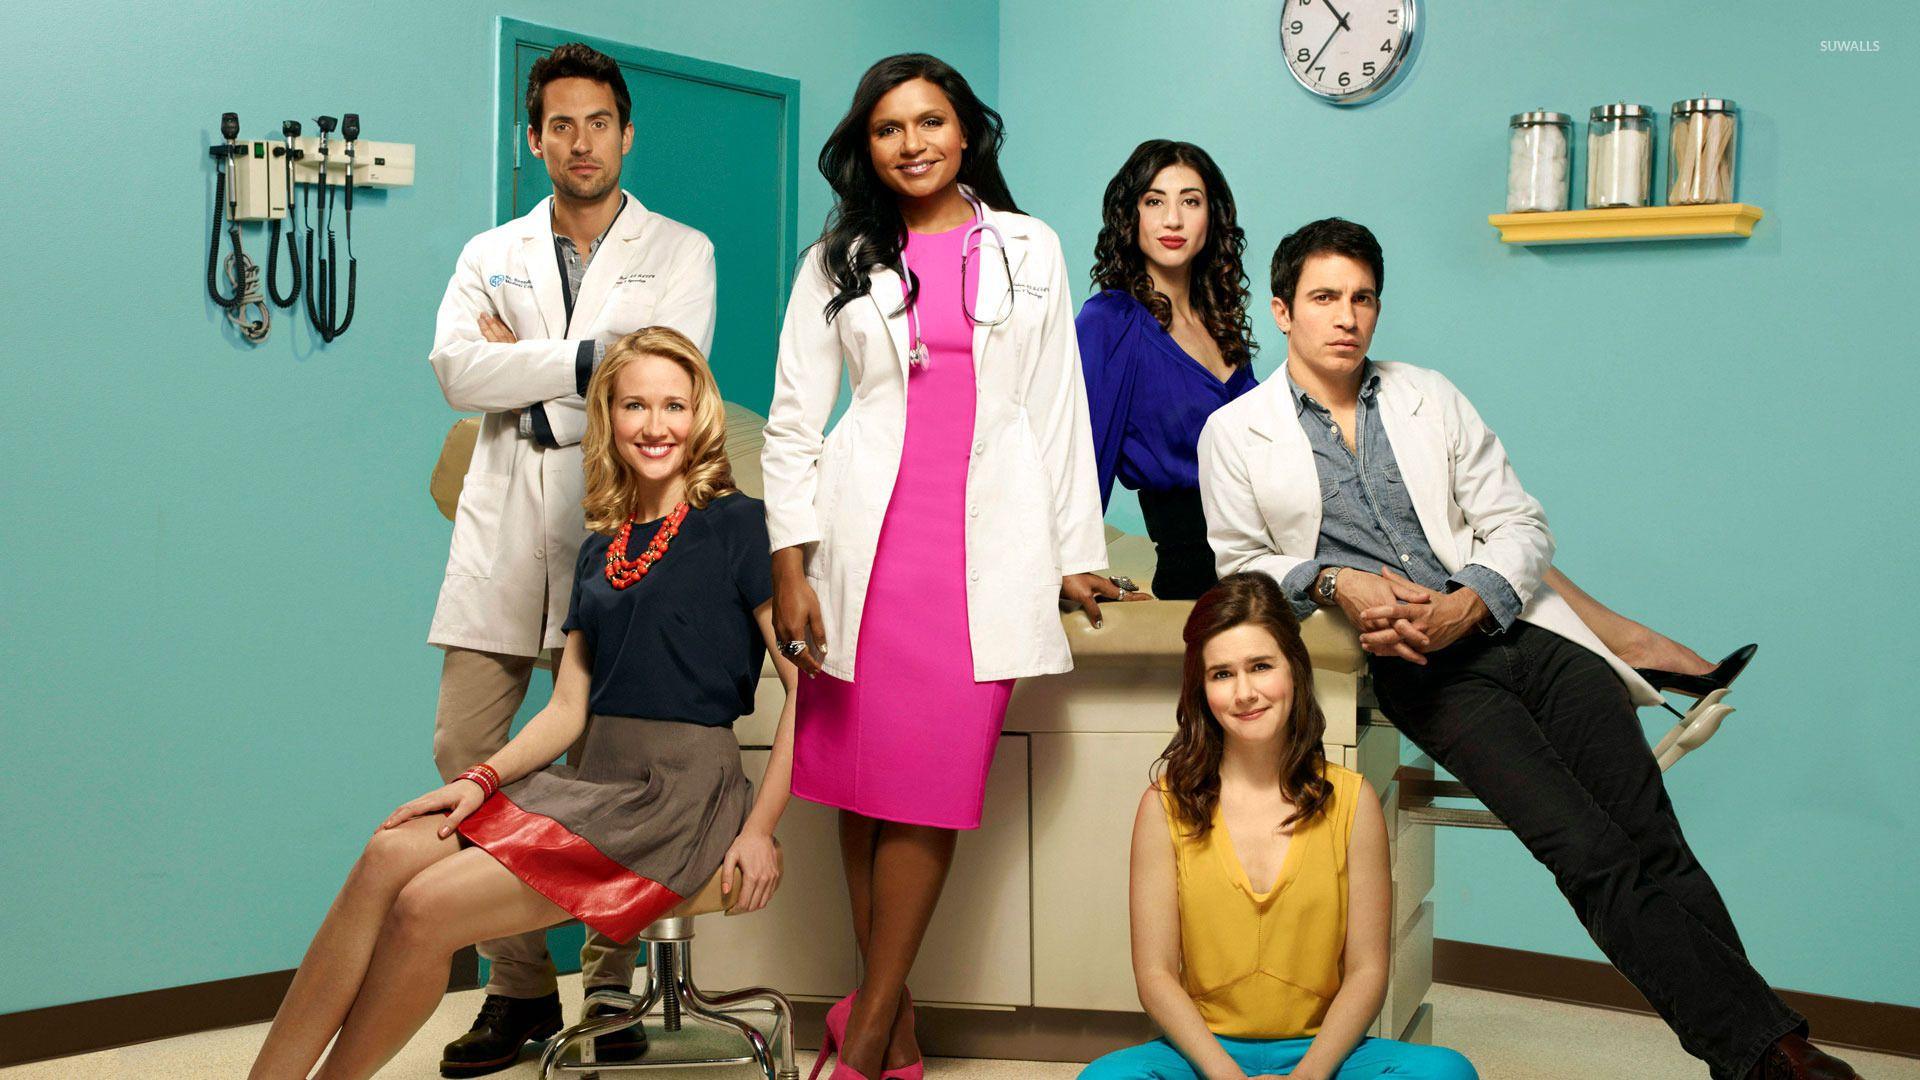 The Mindy Project [3] wallpaper Show wallpaper